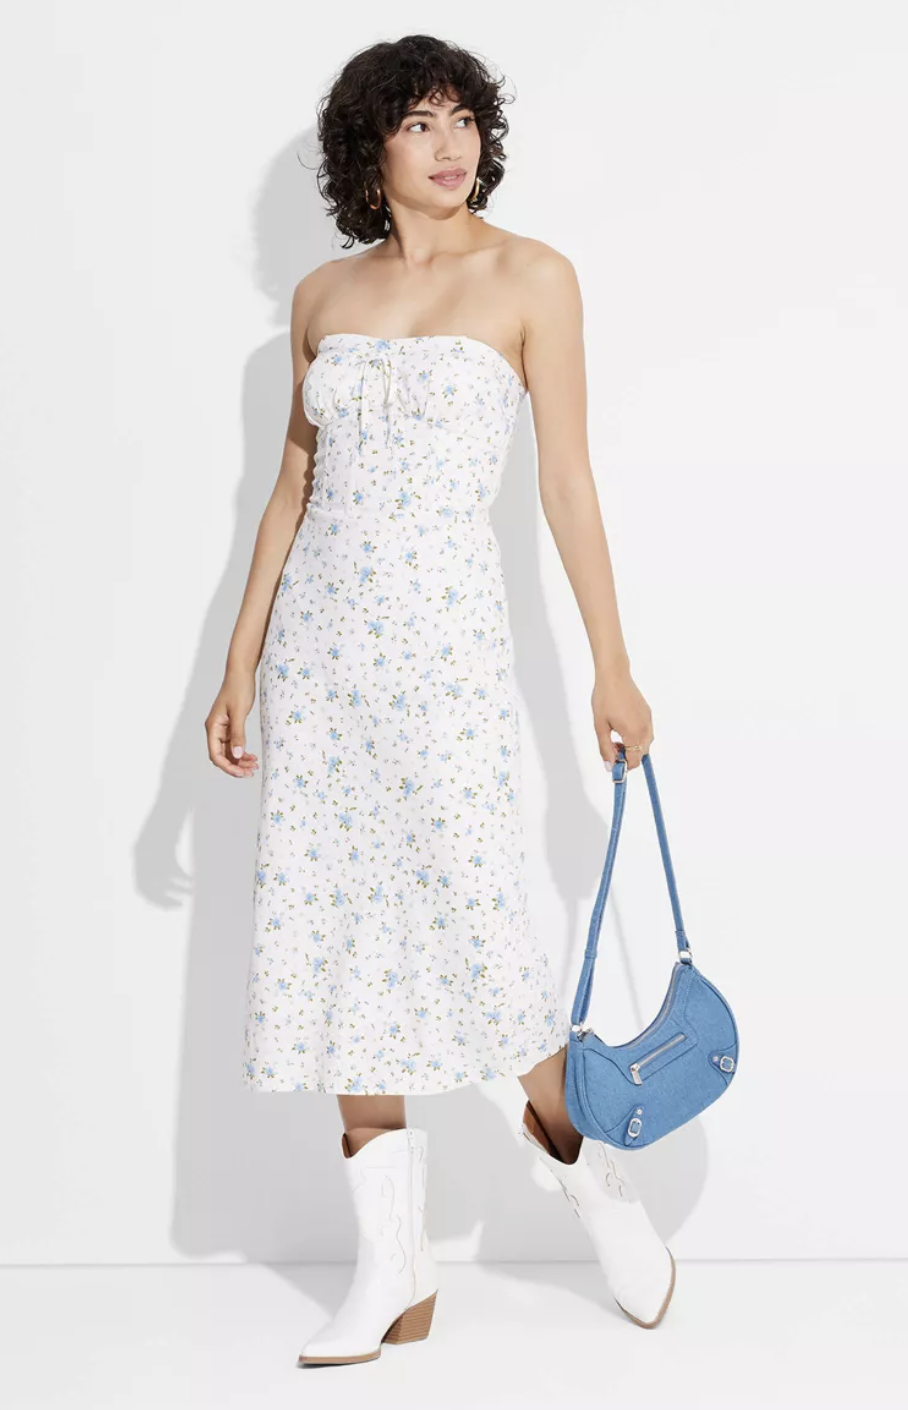 person in a strapless floral dress with a blue bag and white boots posing against a plain background